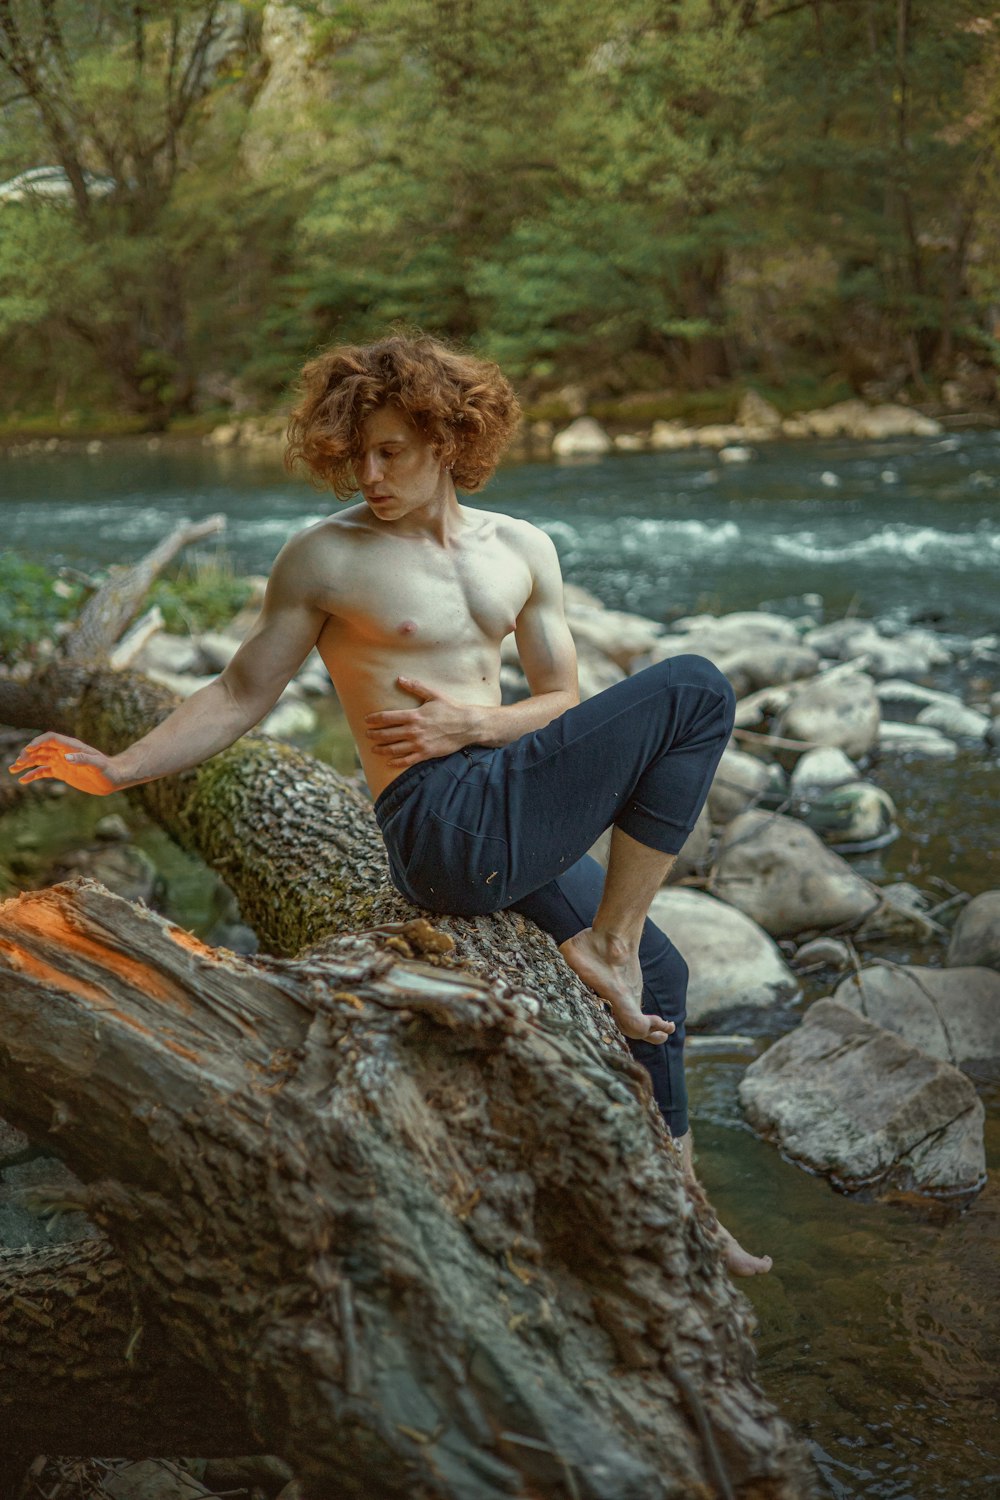 a shirtless man sitting on a log by a river